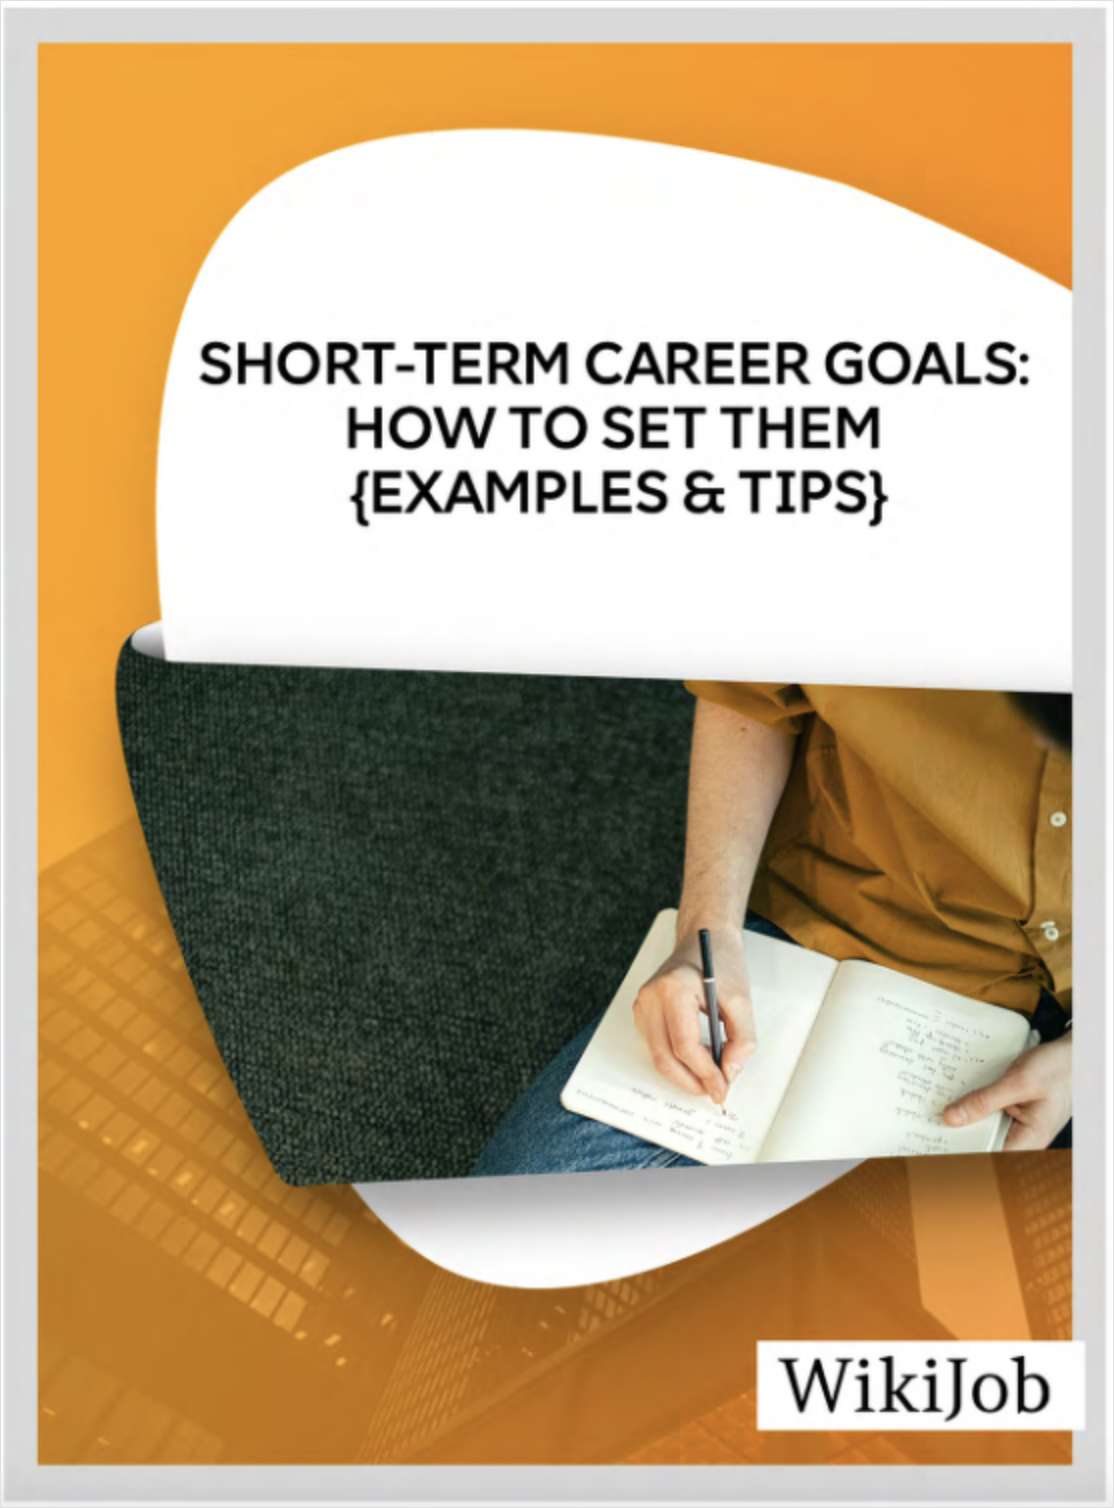 Short-Term Career Goals: How to Set them (Examples & Tips)